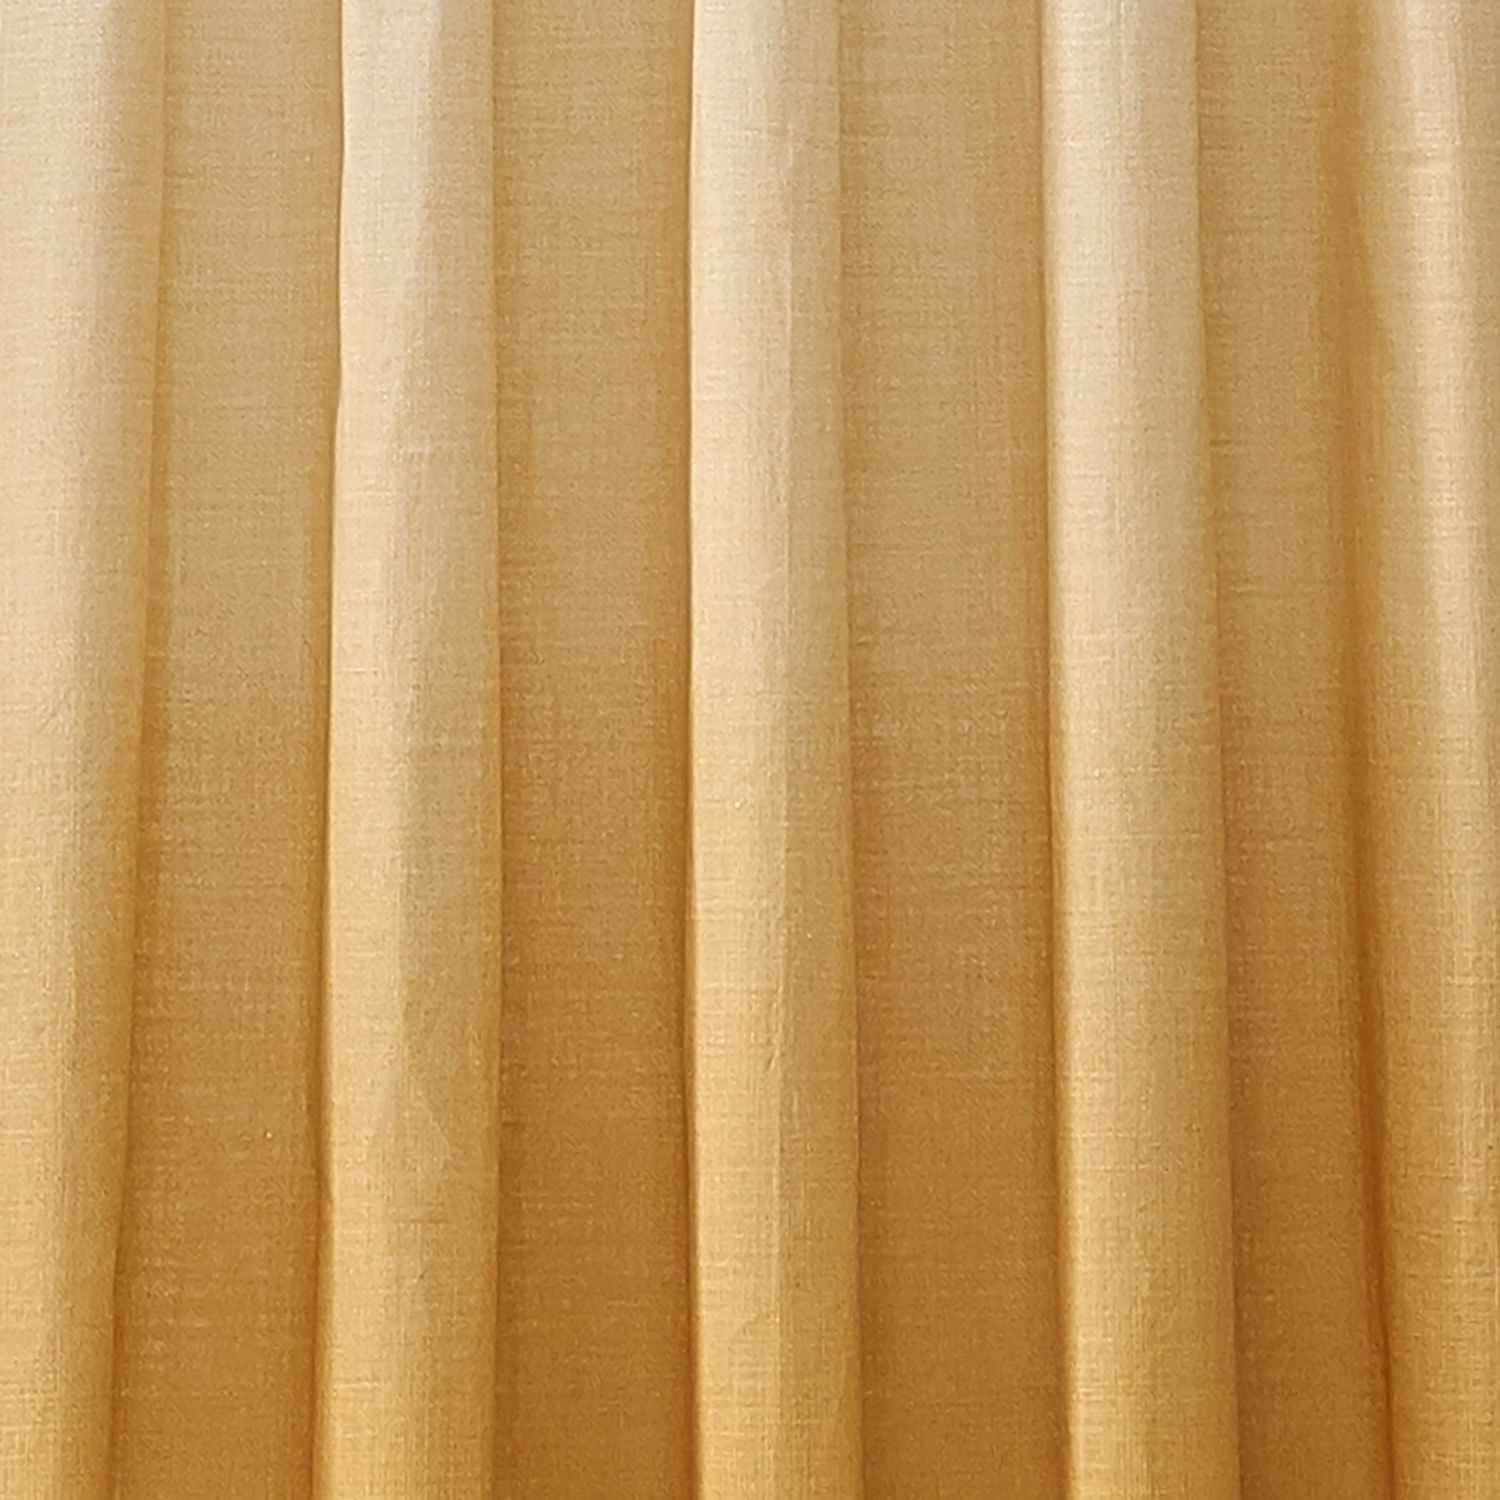 Ombre Embroidery Curtain Panels With Regard To Best And Newest Vue Signature Arashi Ombre Embroidery Curtain Panel (View 5 of 20)